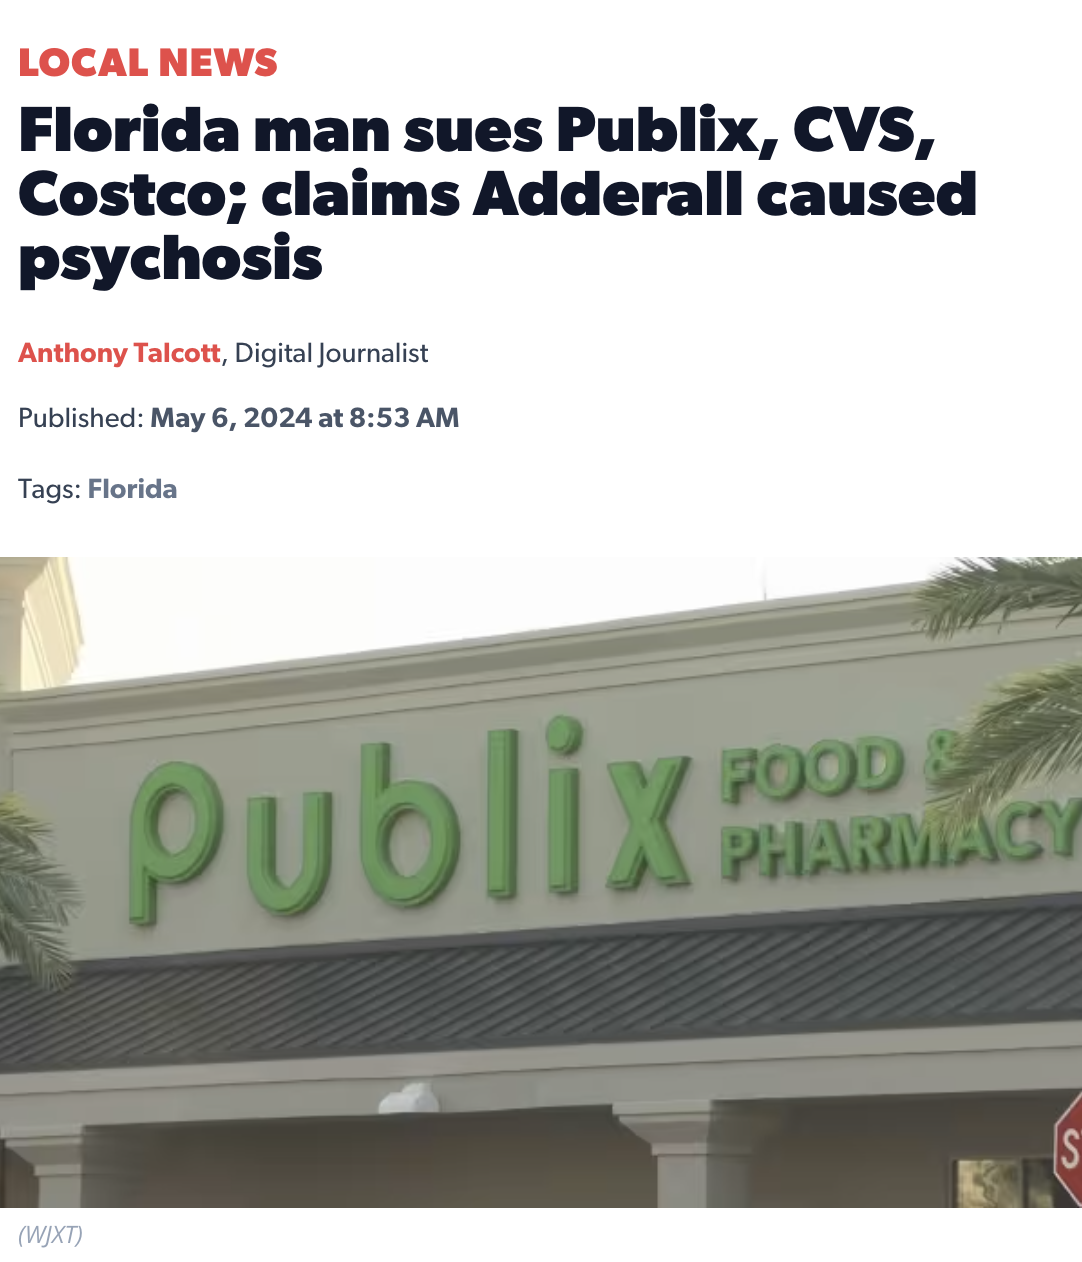 signage - Local News Florida man sues Publix, Cvs, Costco; claims Adderall caused psychosis Anthony Talcott, Digital Journalist Published at Tags Florida Wxt Publix Food Pharmacy